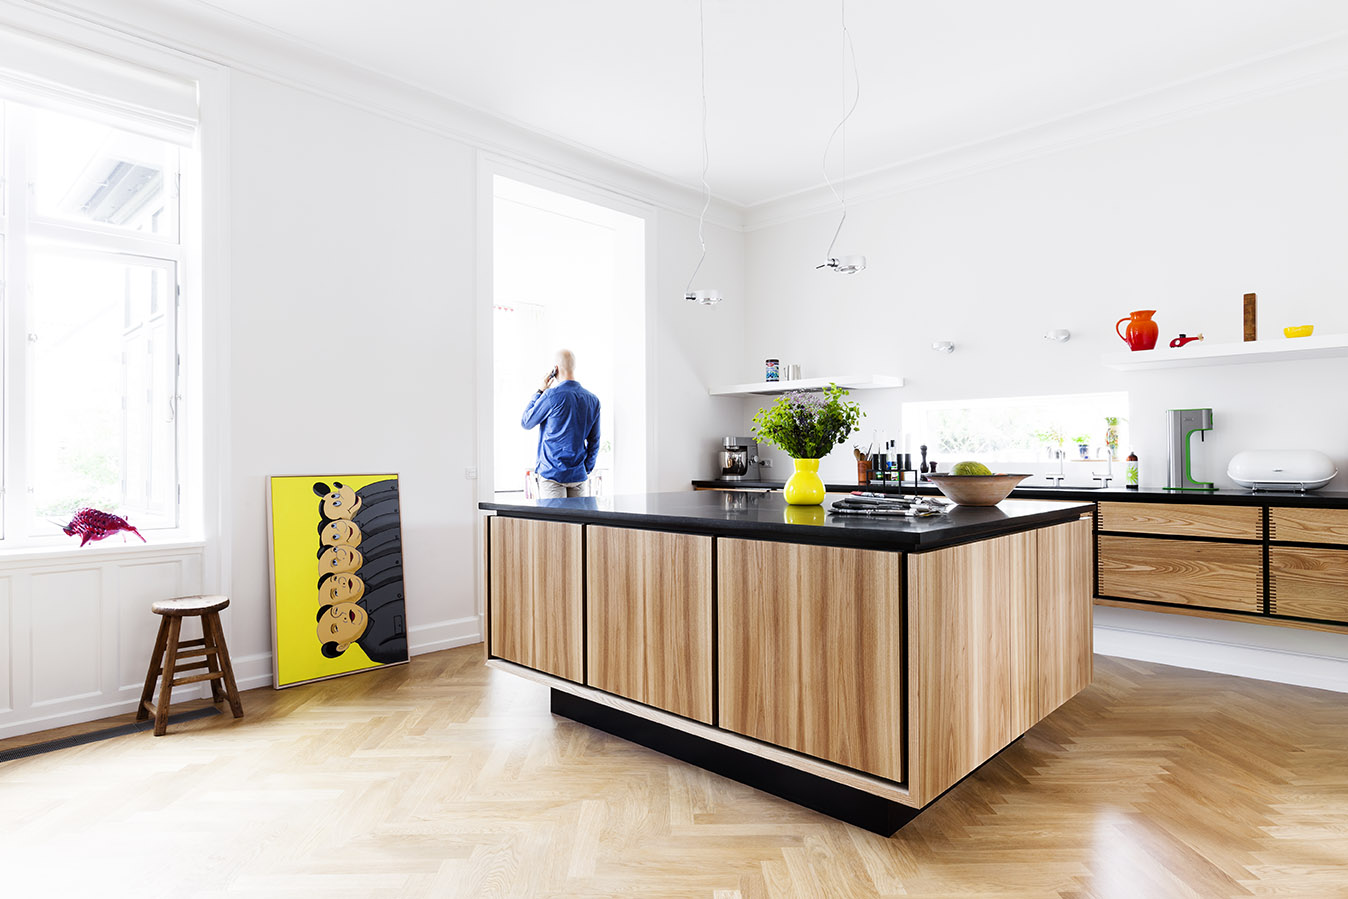 Great Swedish Kitchen Design Ideas for your home | Ideas 4 Homes